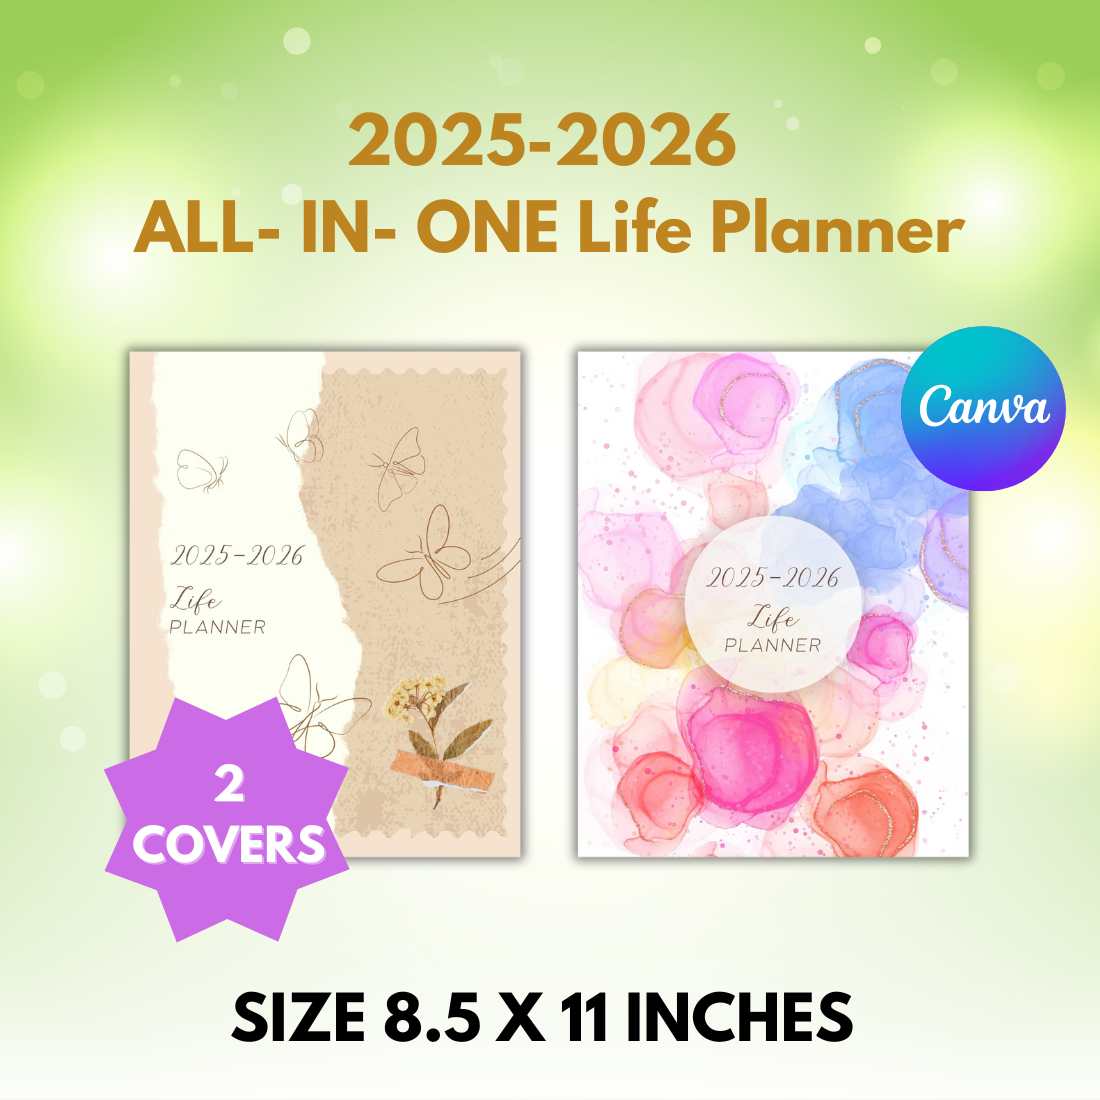 2025-2026 All-in-one Life Planner preview image.